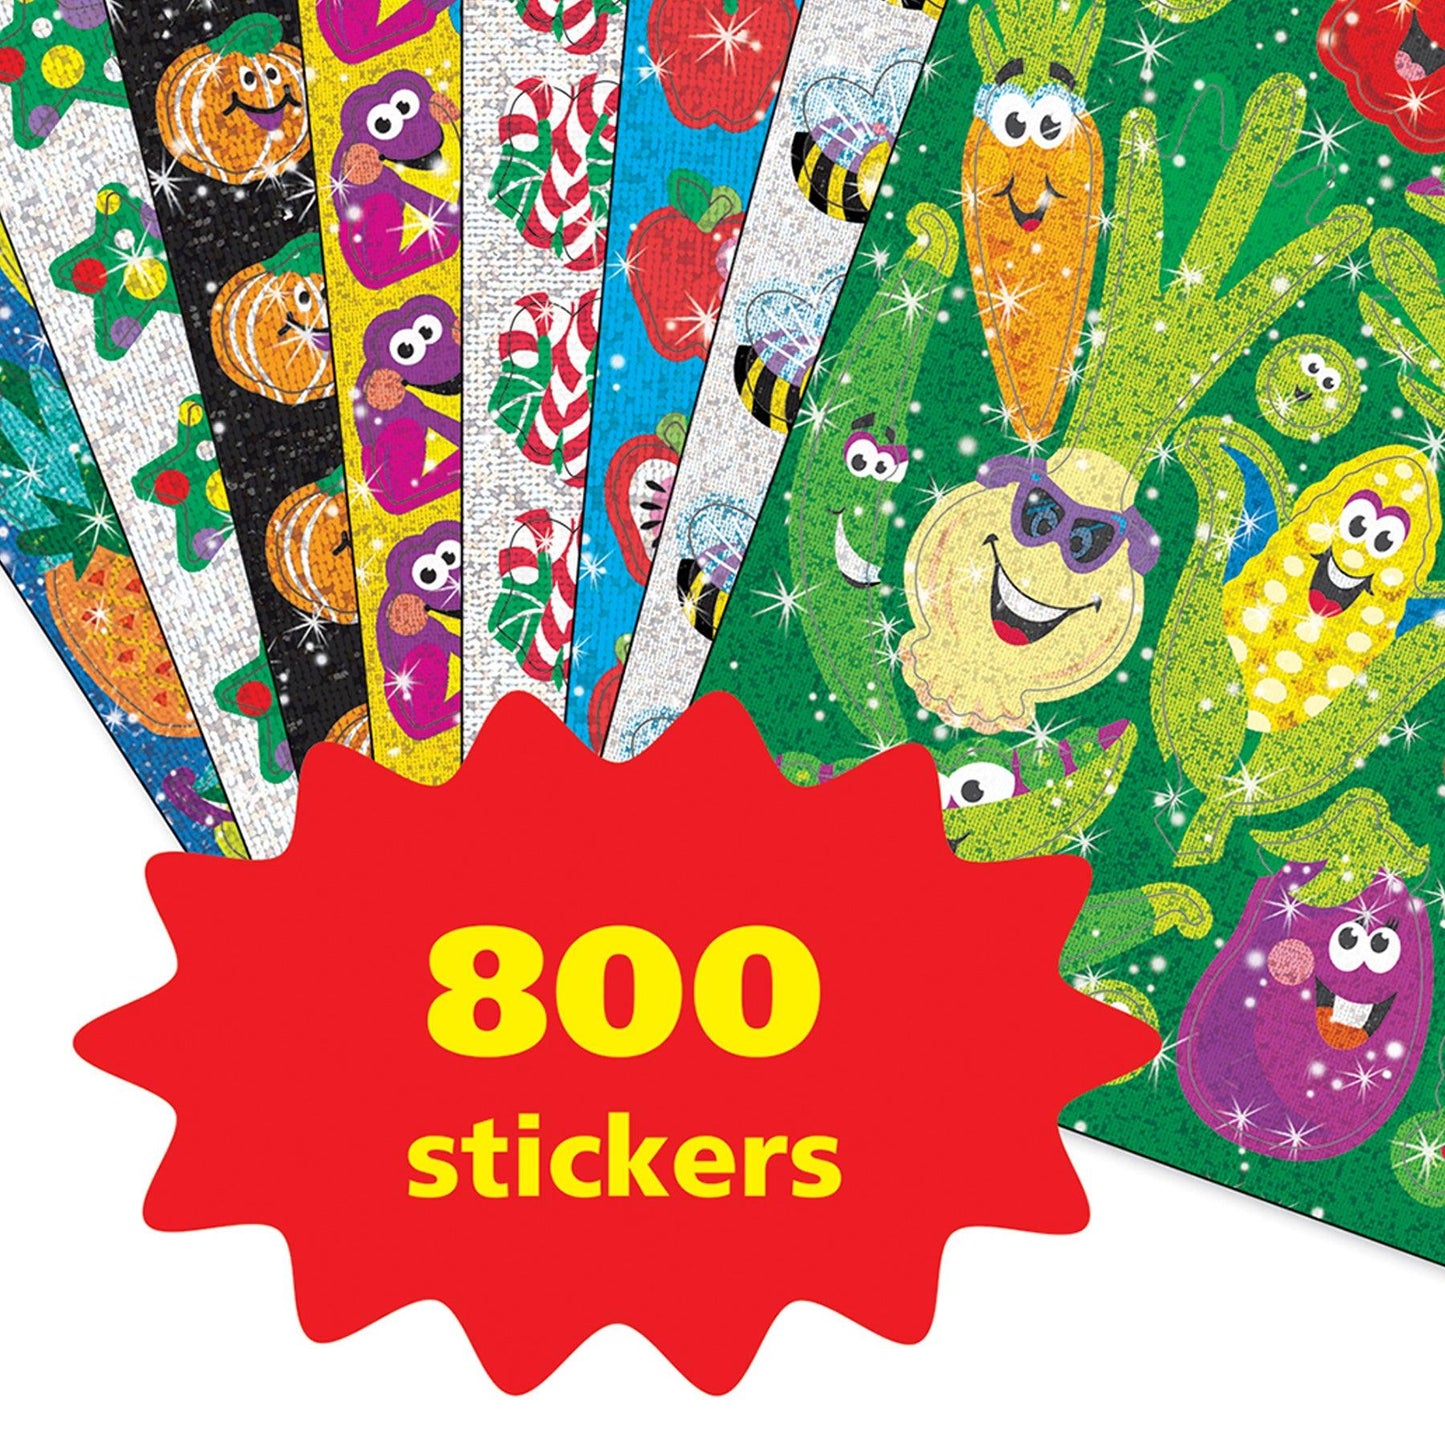 Sparkle Stickers® Assortment Pack, 800 Stickers - Loomini